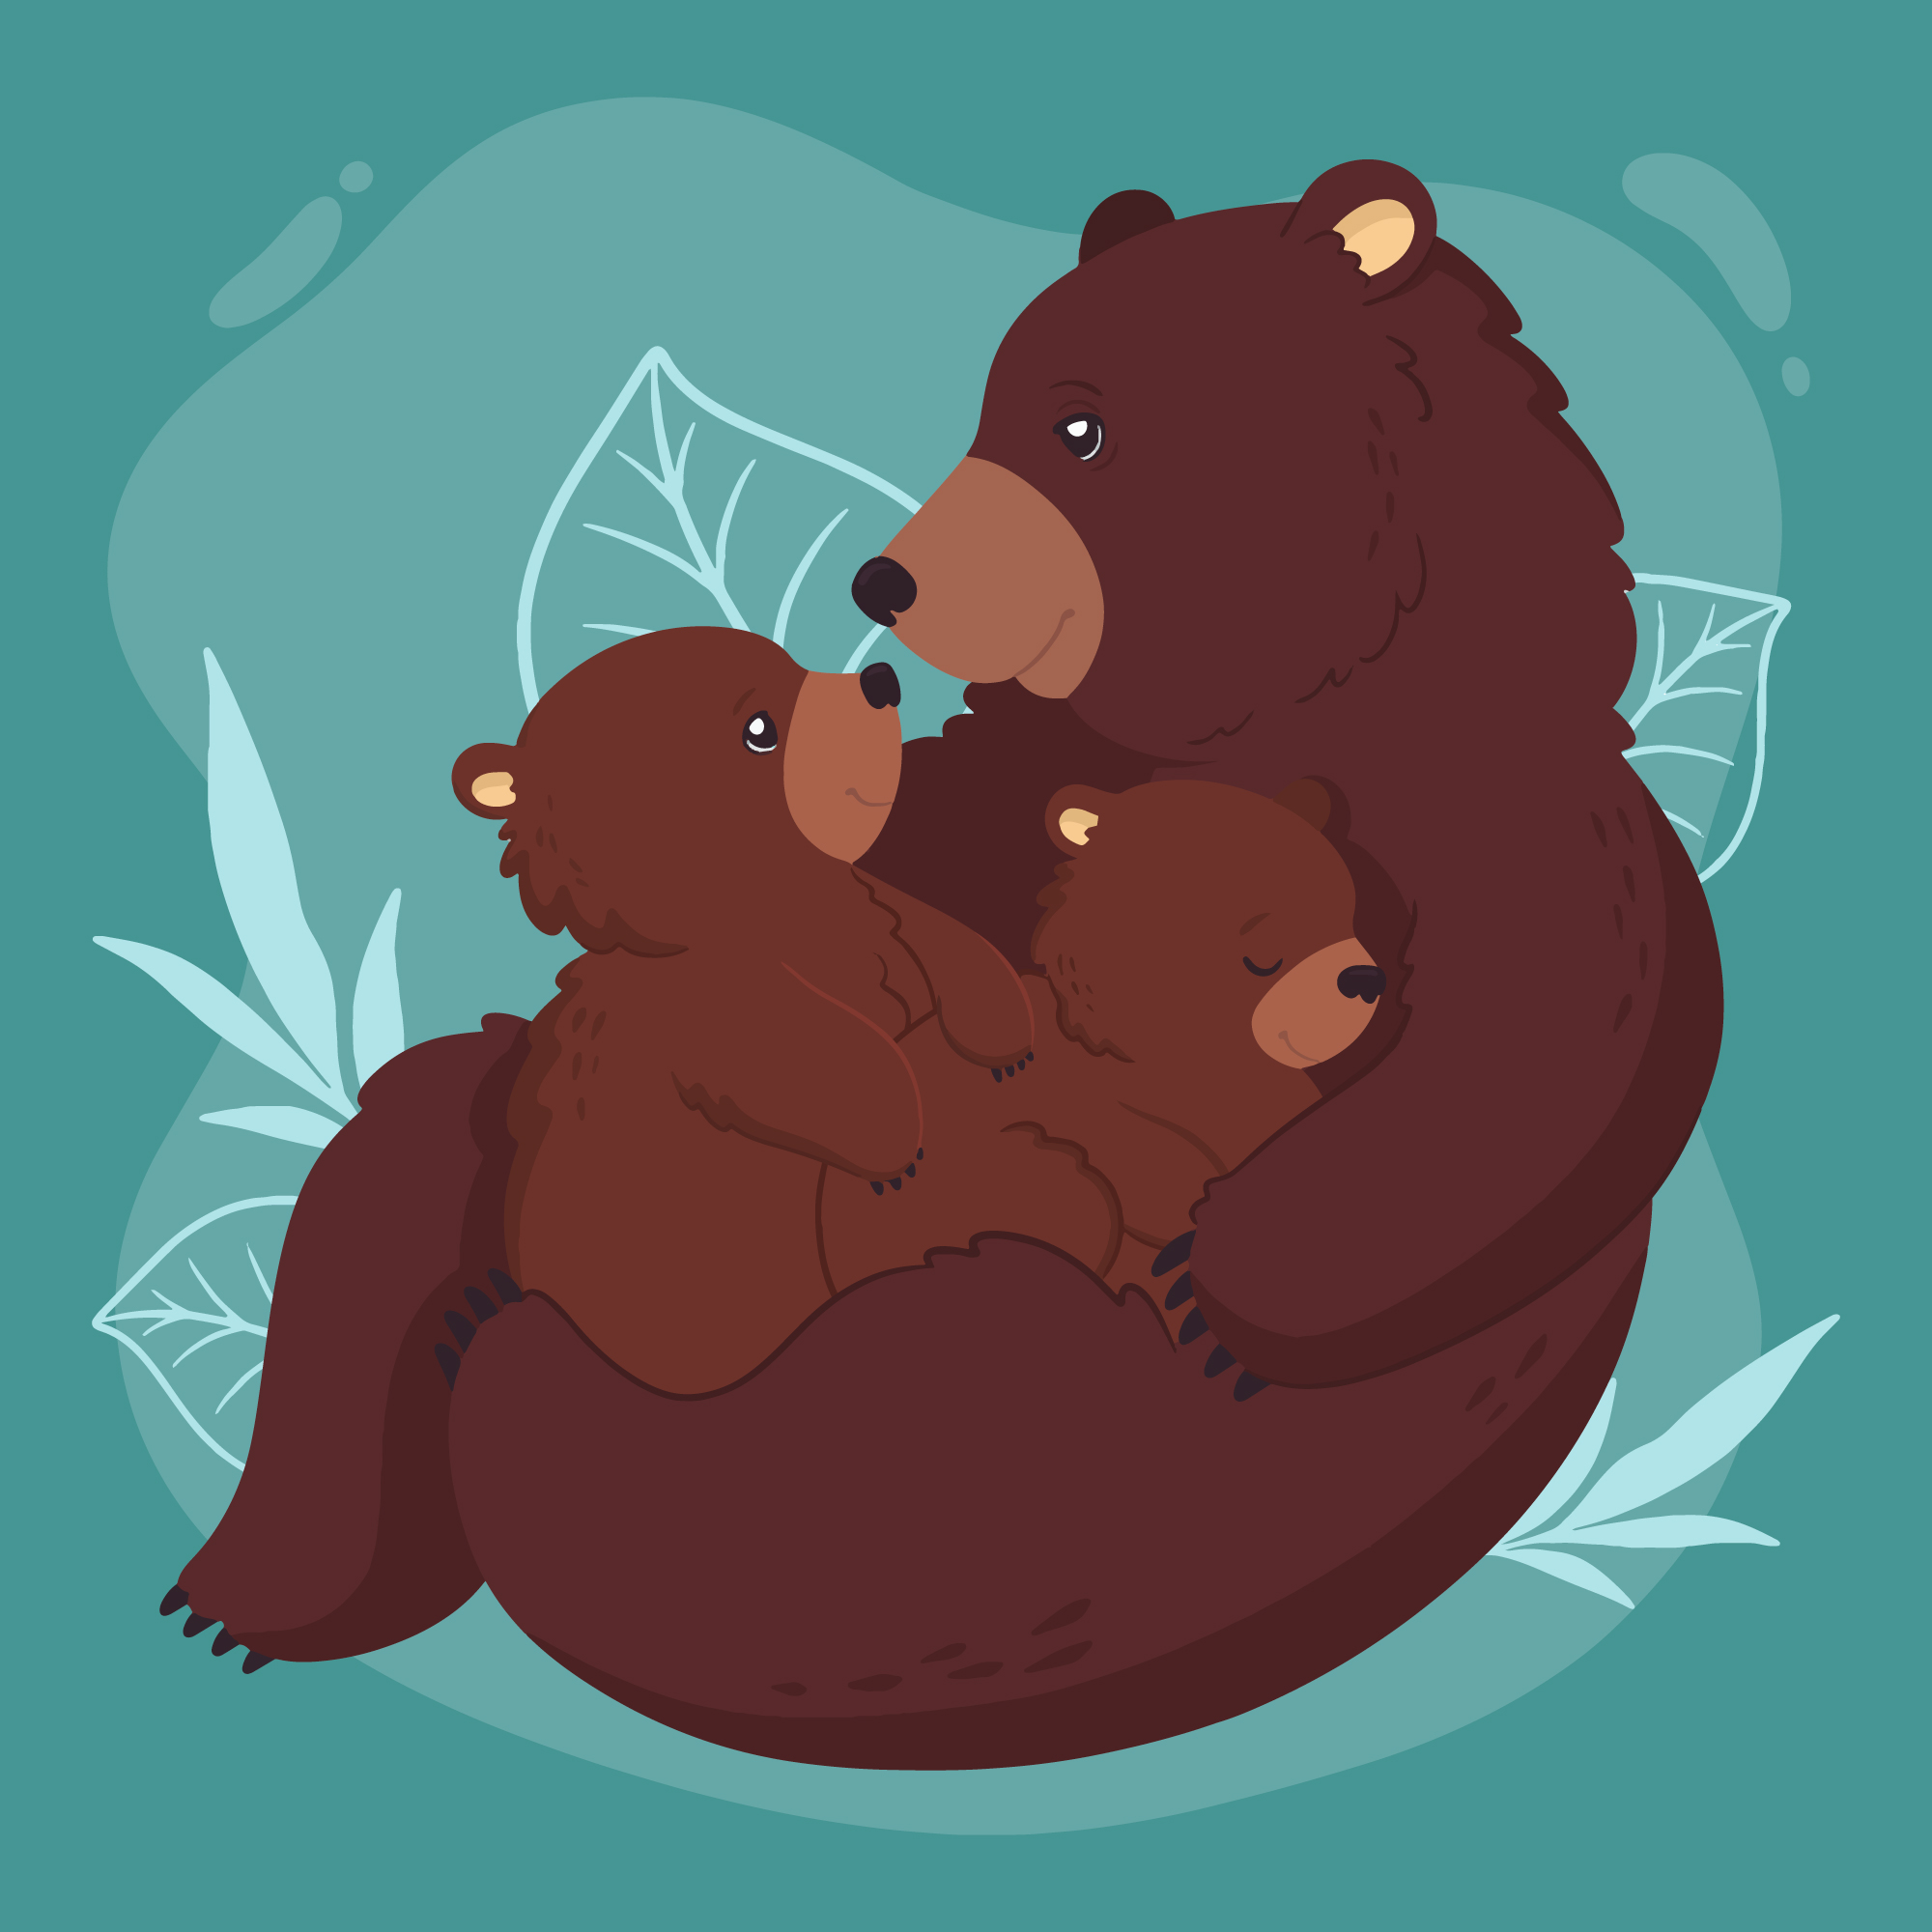 parent bear cuddling two cubs with a teal background